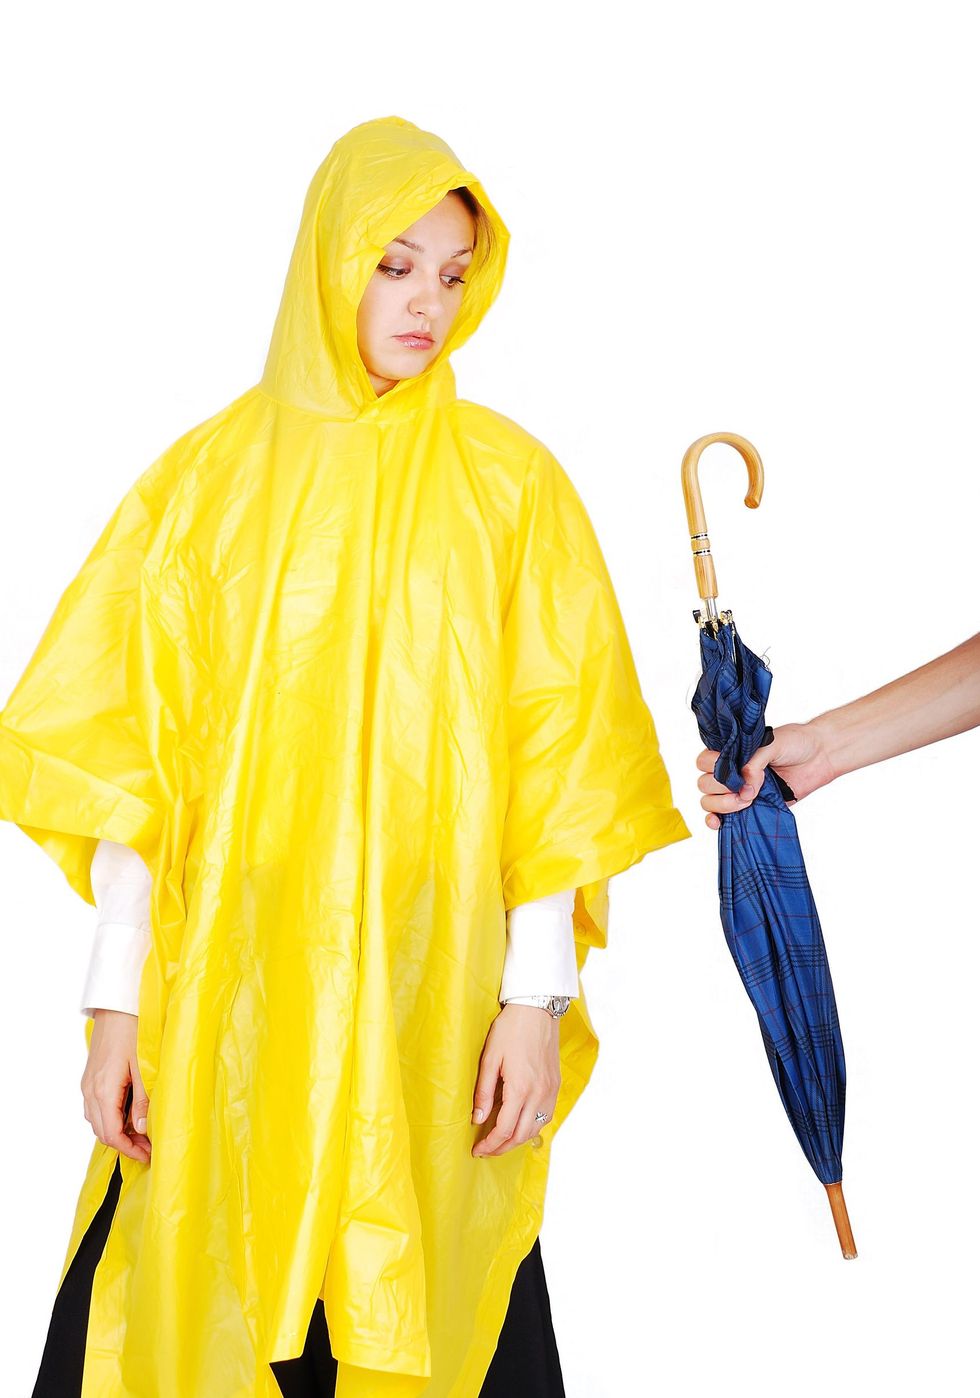 7 Thoughts Every U of A Sorority Girl Has When it Rains